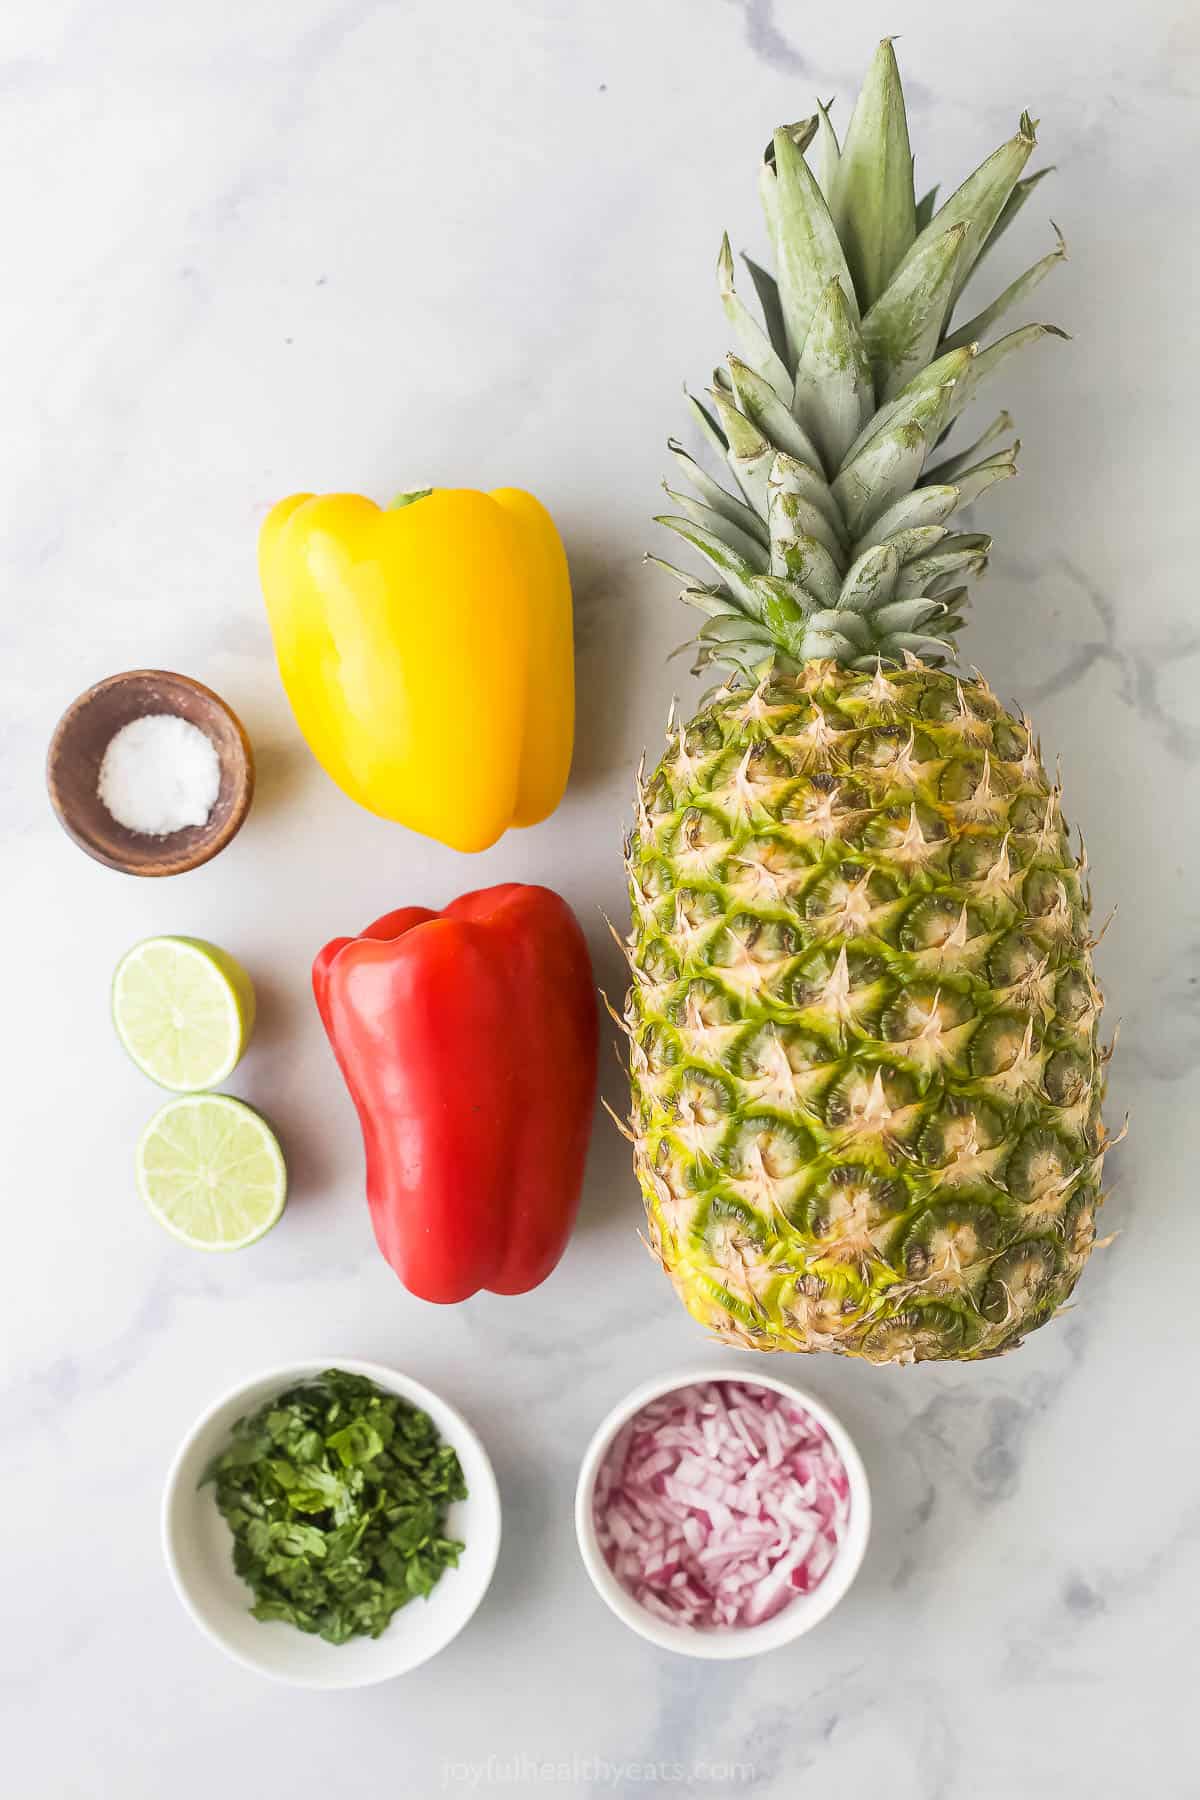 Ingredients for grilled burgers with avocado. 